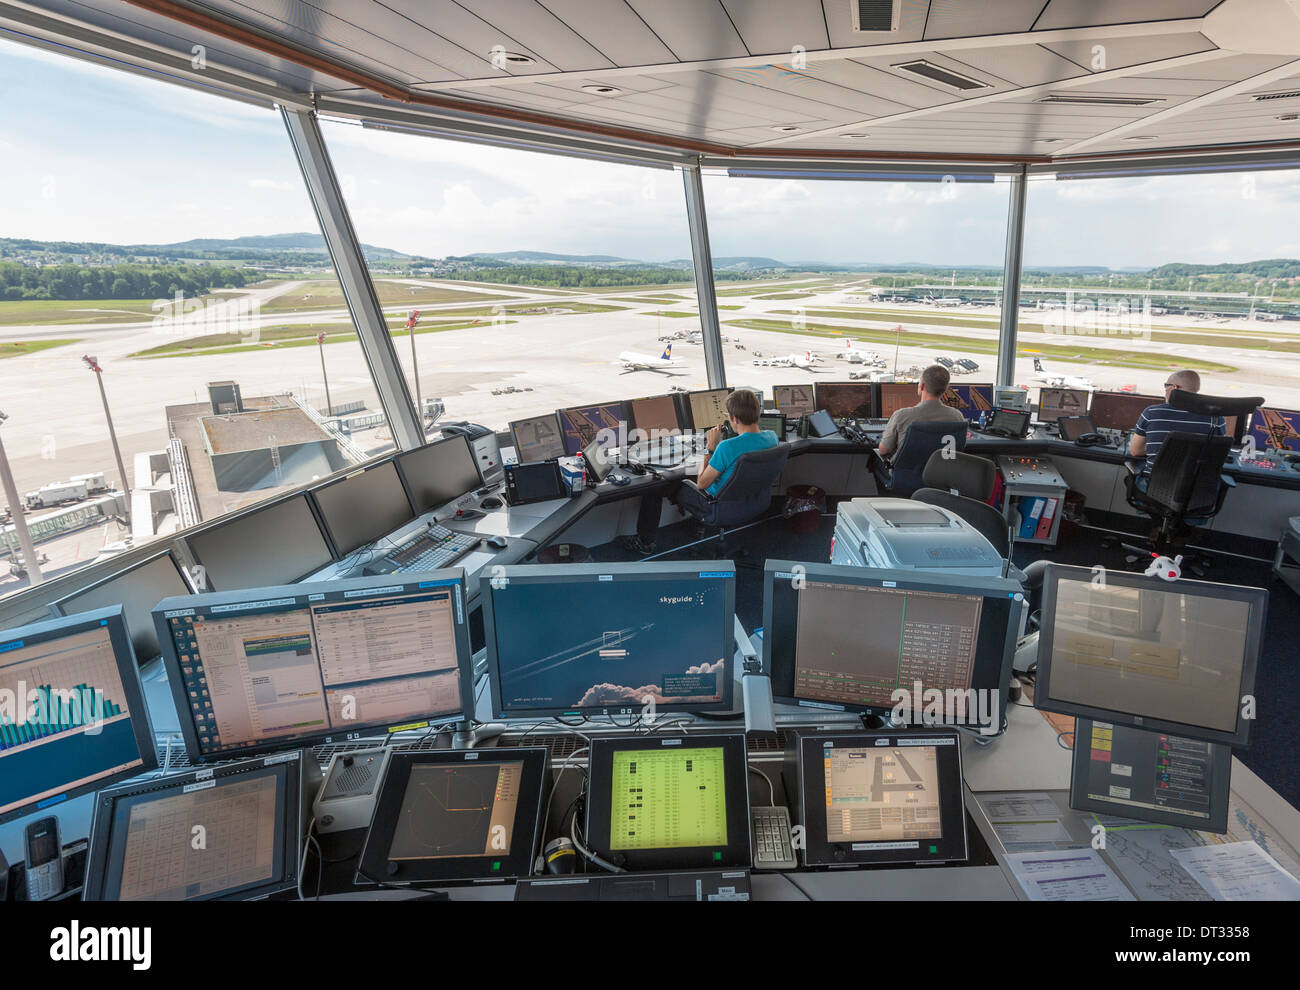 Air traffic controllers in the control tower of Zurich/Kloten international airport are monitoring the airport's airfield. Stock Photo